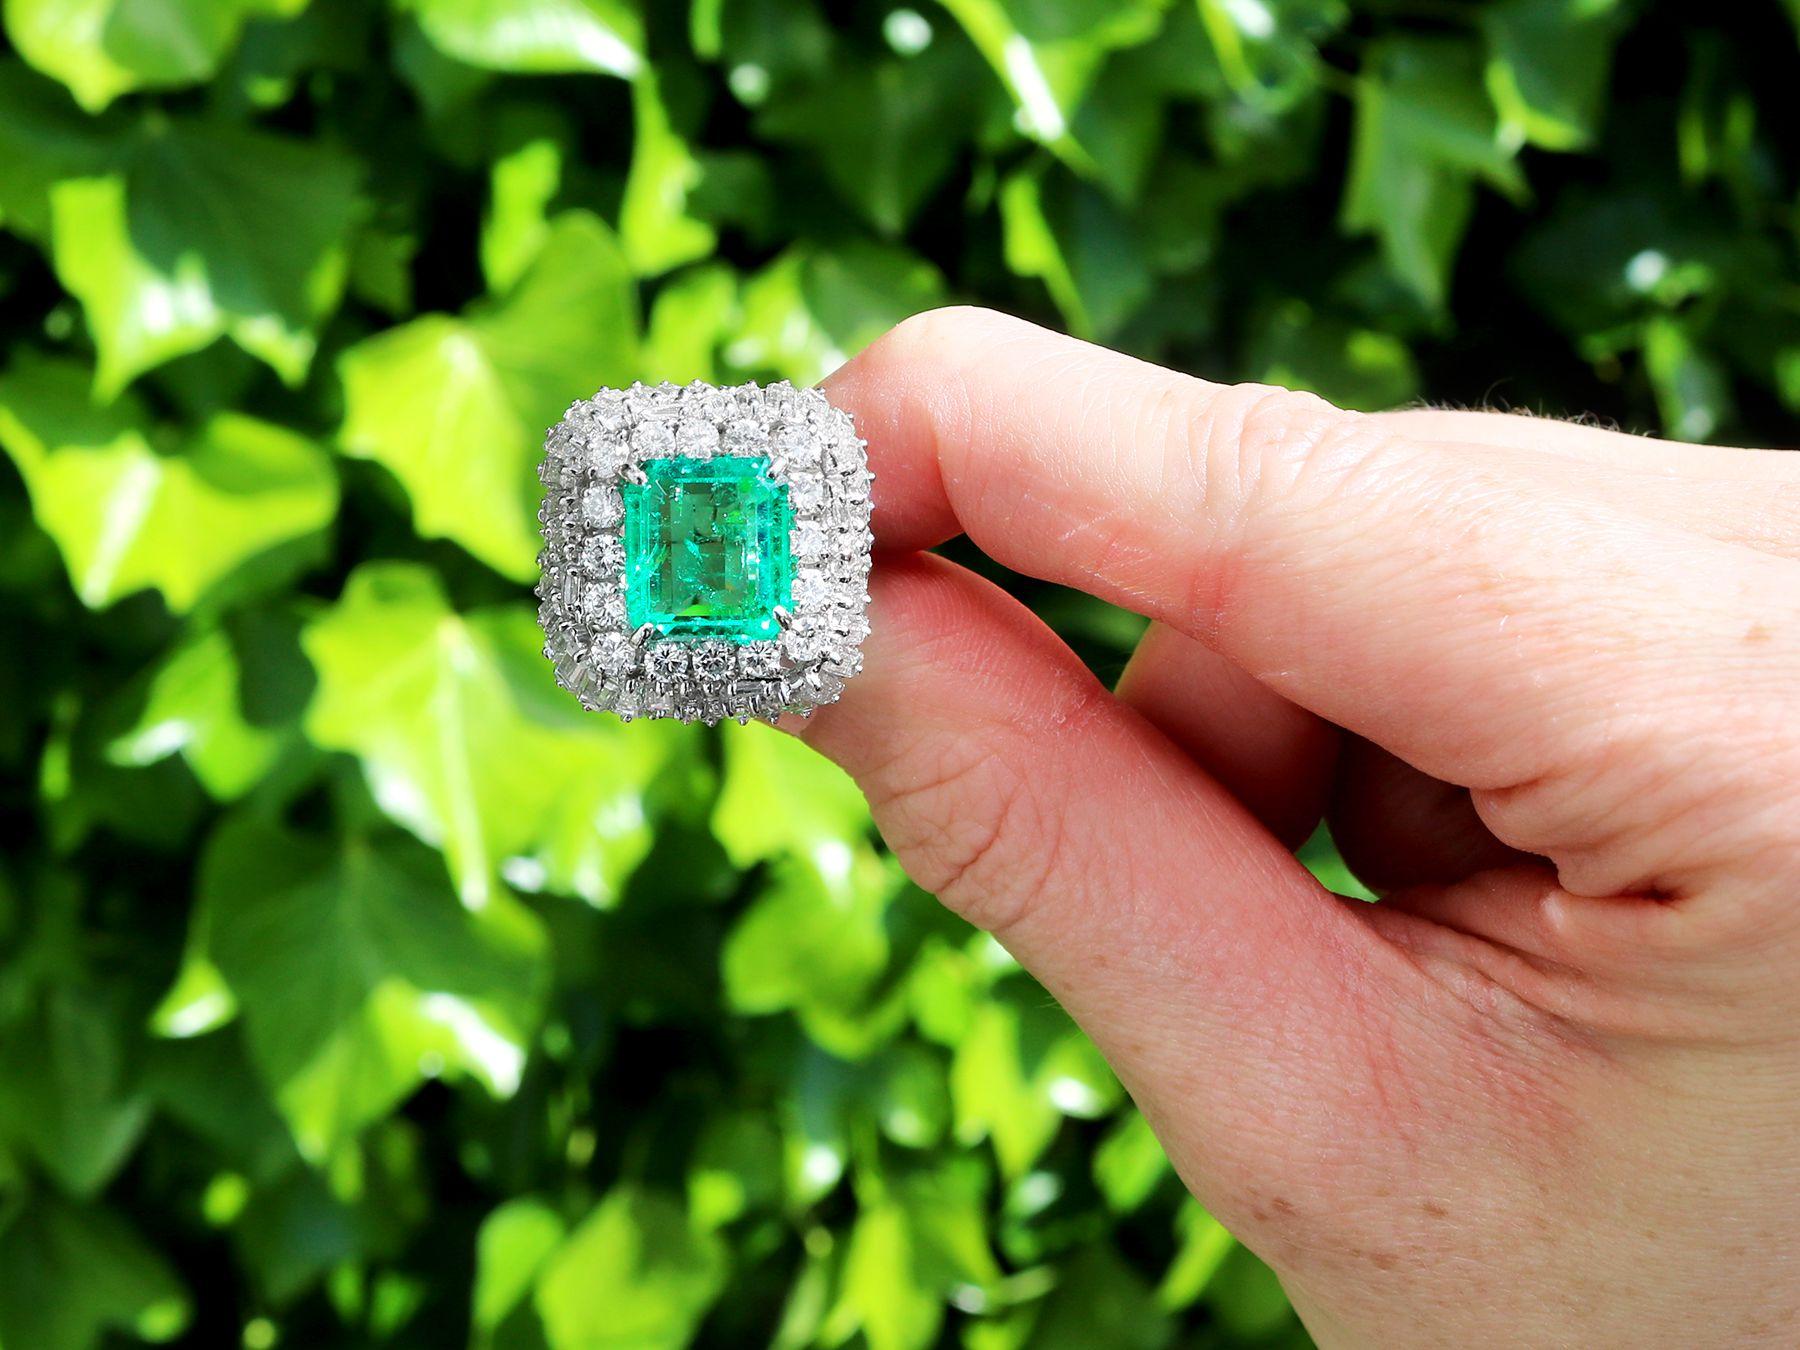 A magnificent, stunning, fine and impressive 5.11 carat Colombian emerald and 3.32 carat diamond, platinum dress ring; part of our diverse vintage jewelry collections.

This magnificent, stunning, fine and impressive vintage emerald ring has been